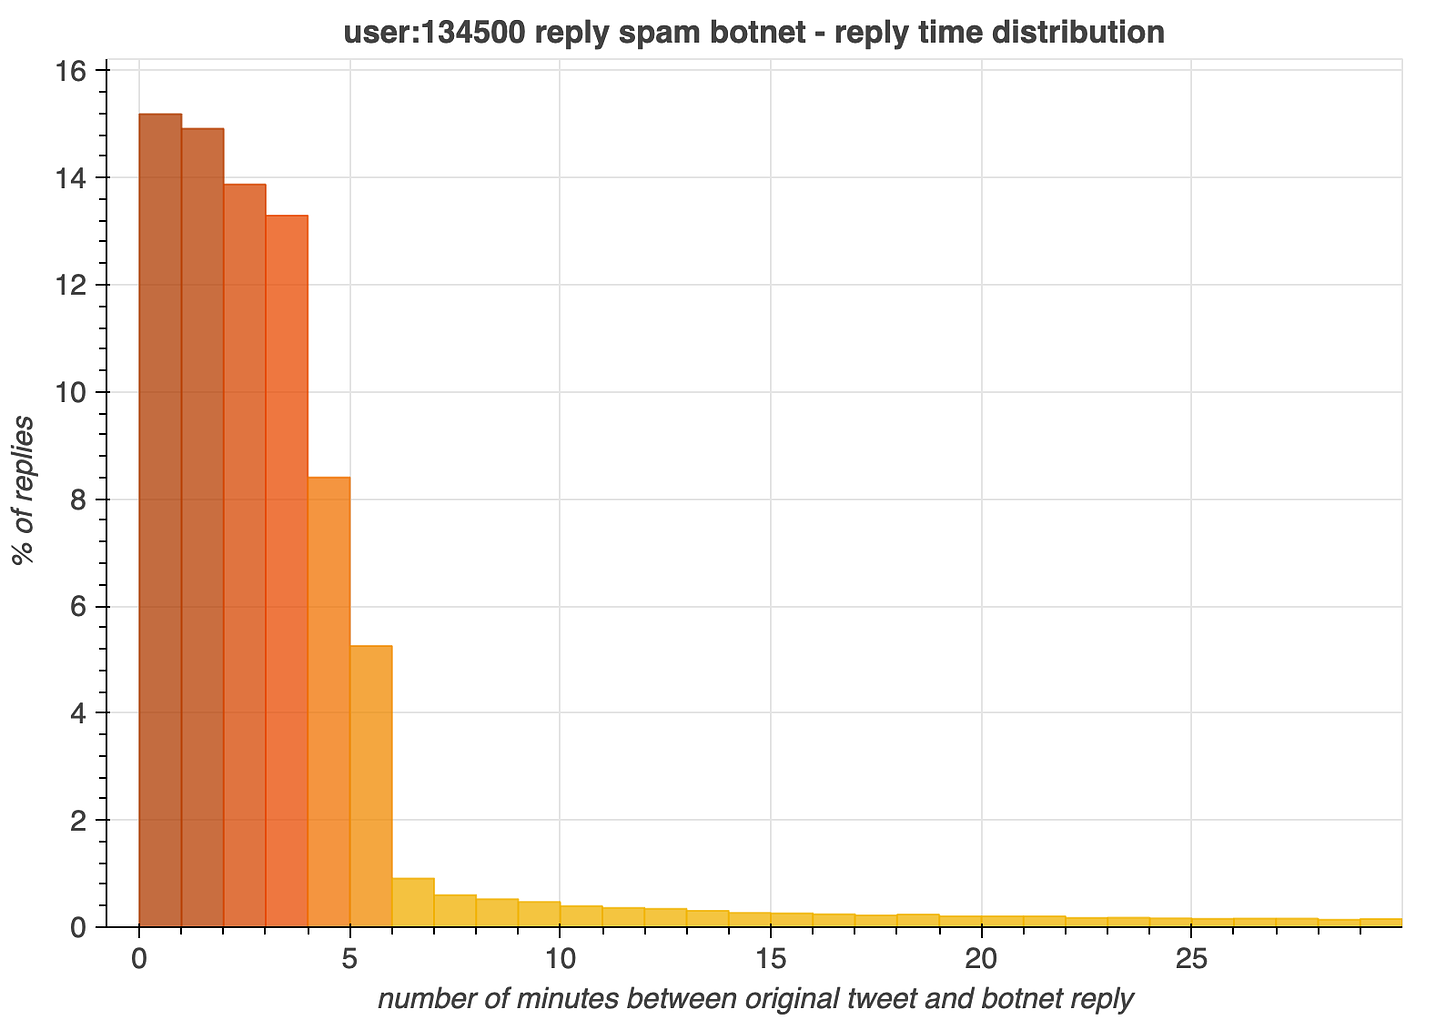 graph showing the distribution of the time between a tweet being posted and the network replying to it with spam